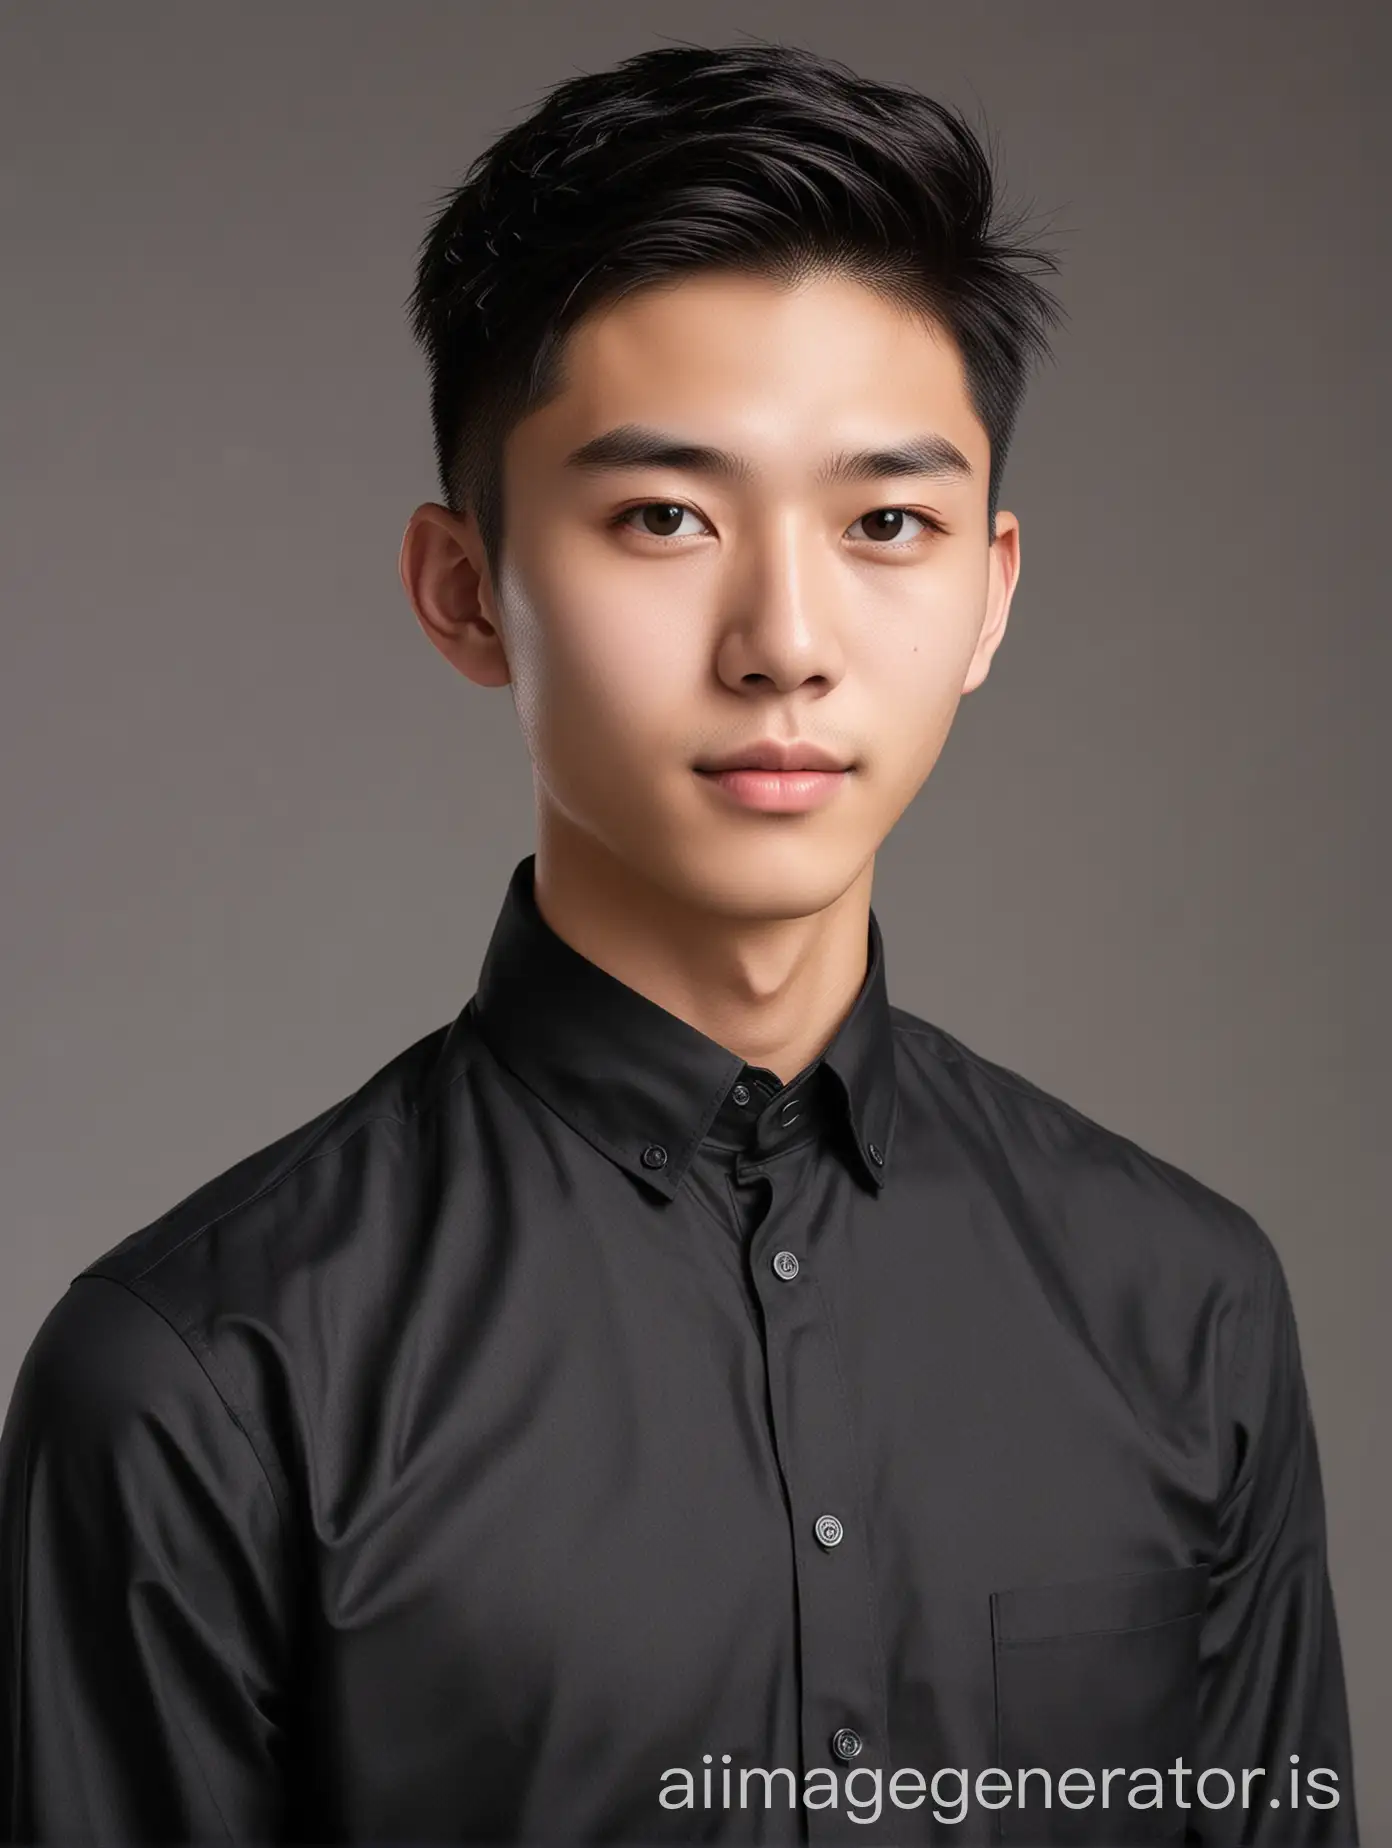 18 year old chinese teen male fair skin slightly lighter tone posing for a LinkedIn photo in black formal shirt wear solid and light forming in background wearing with side part fade haircut